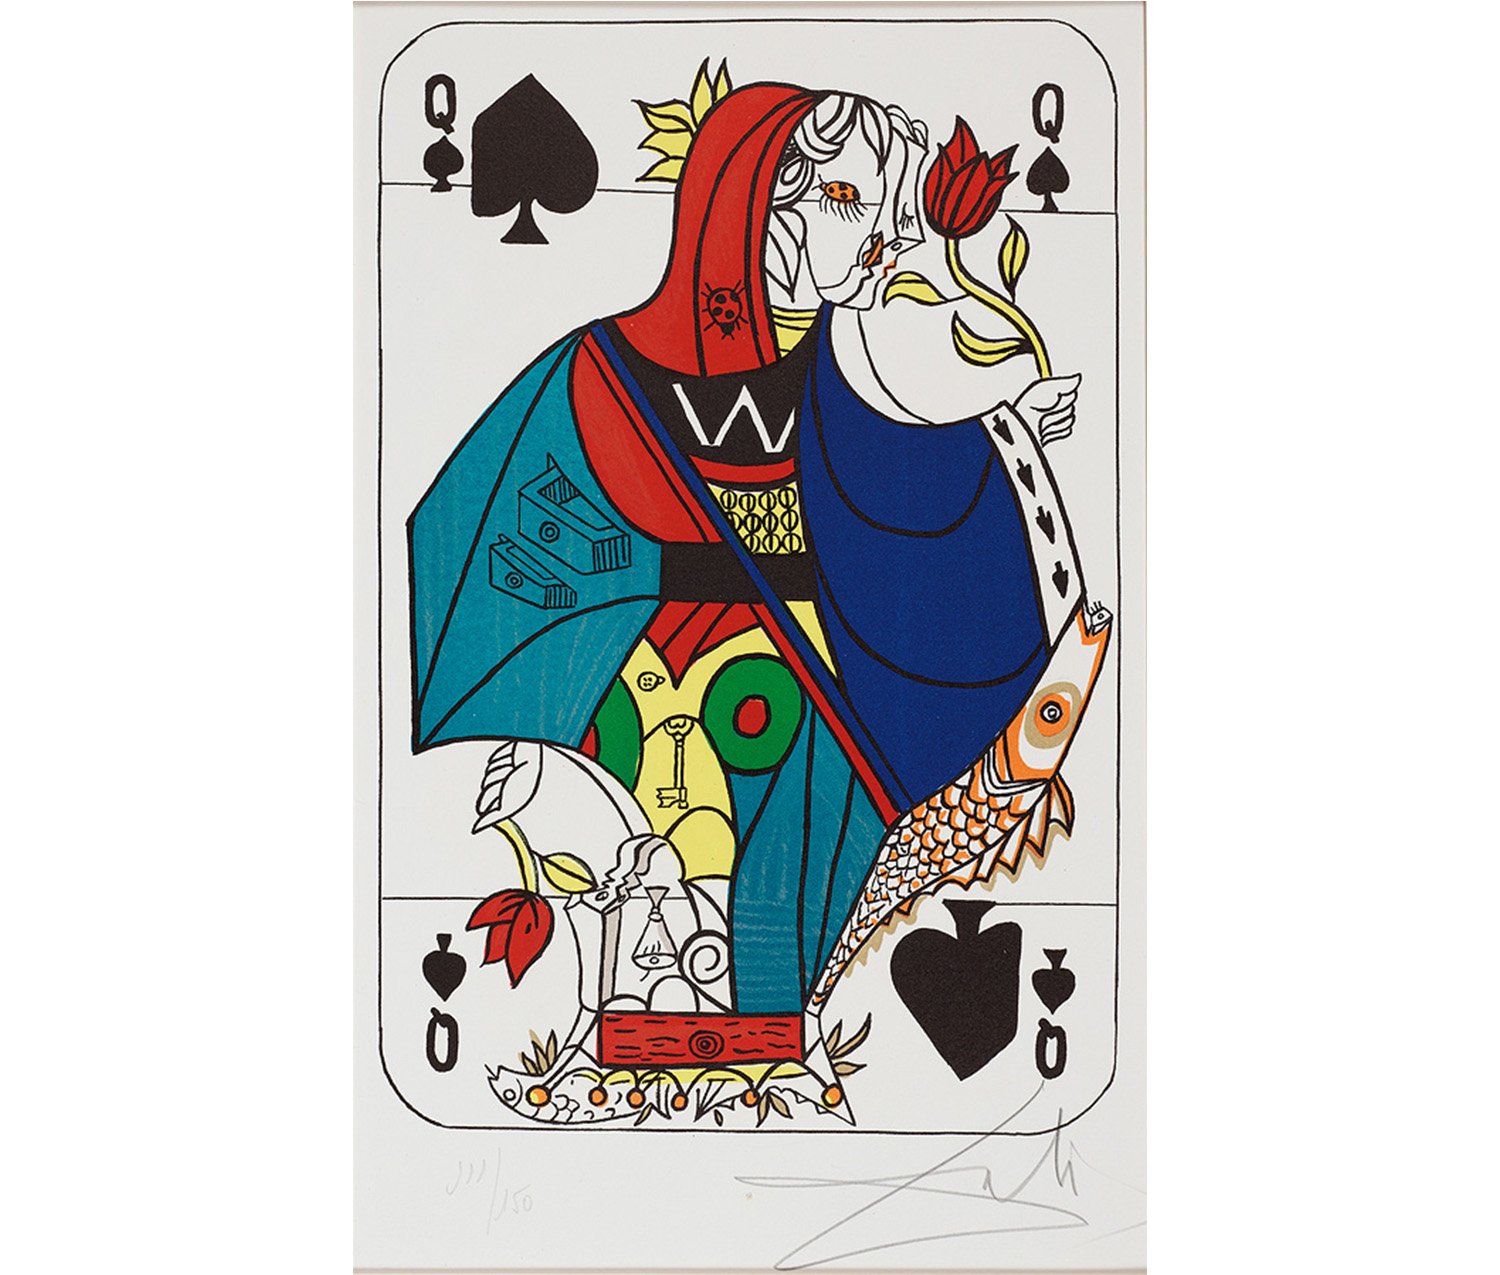 playing card of a queen of spades wearing elaborate cloaks and smelling a rose